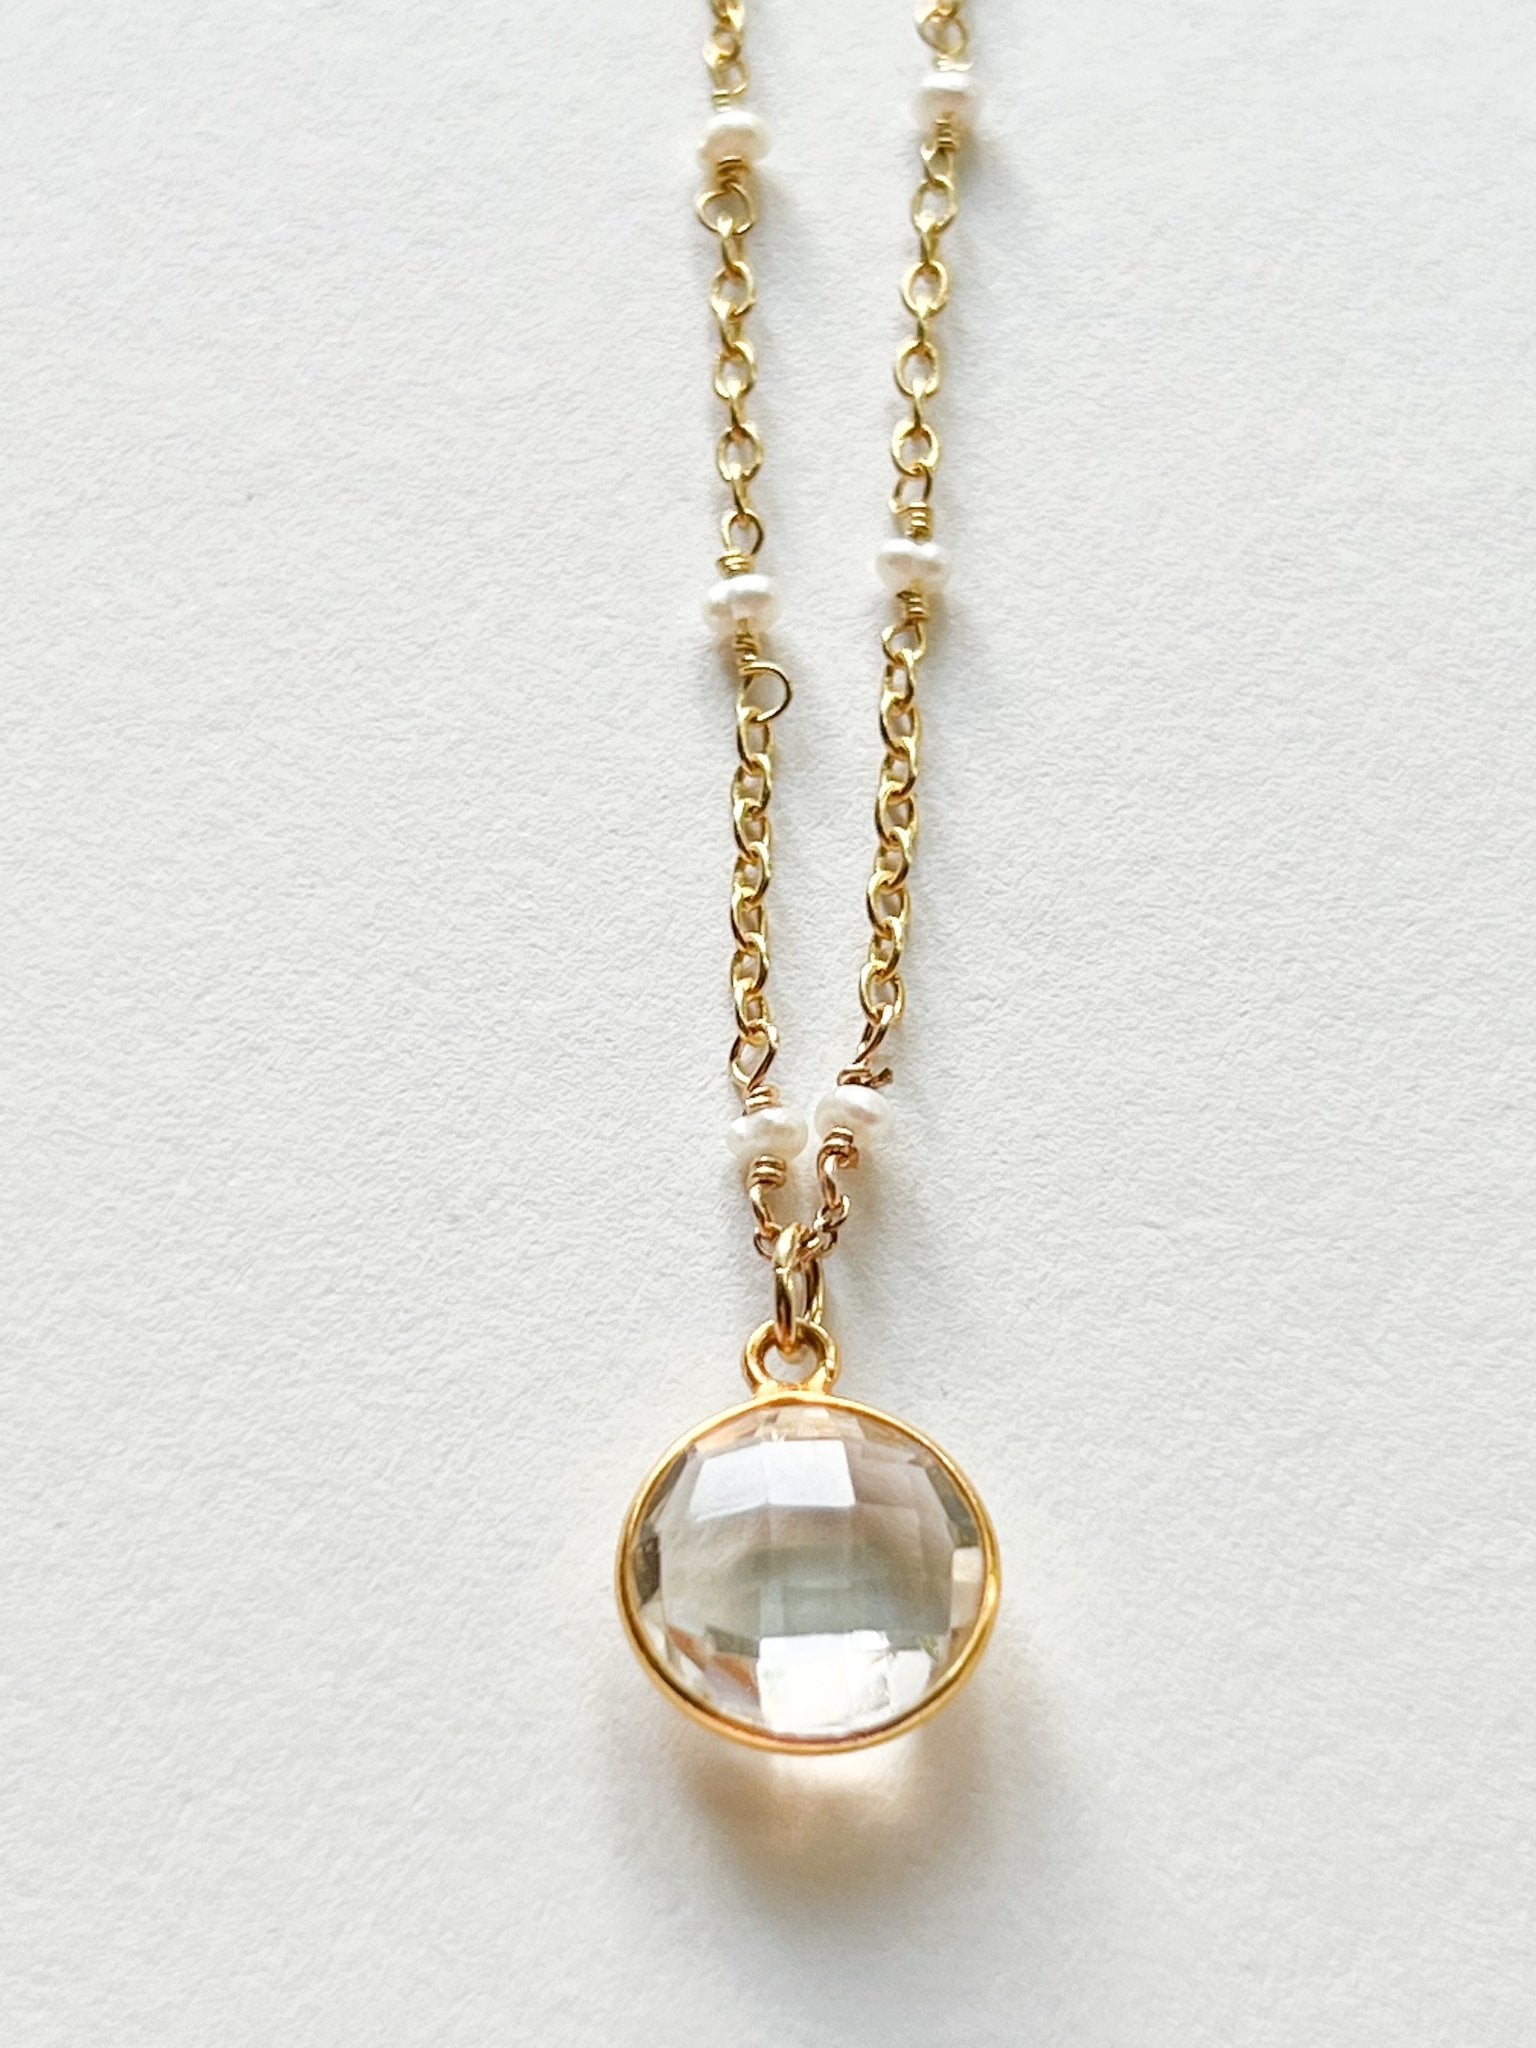 Rock Quartz Crystal Round Charm Necklace on Gold Chain with White Freshwater Pearls by Sage Machado - The Sage Lifestyle